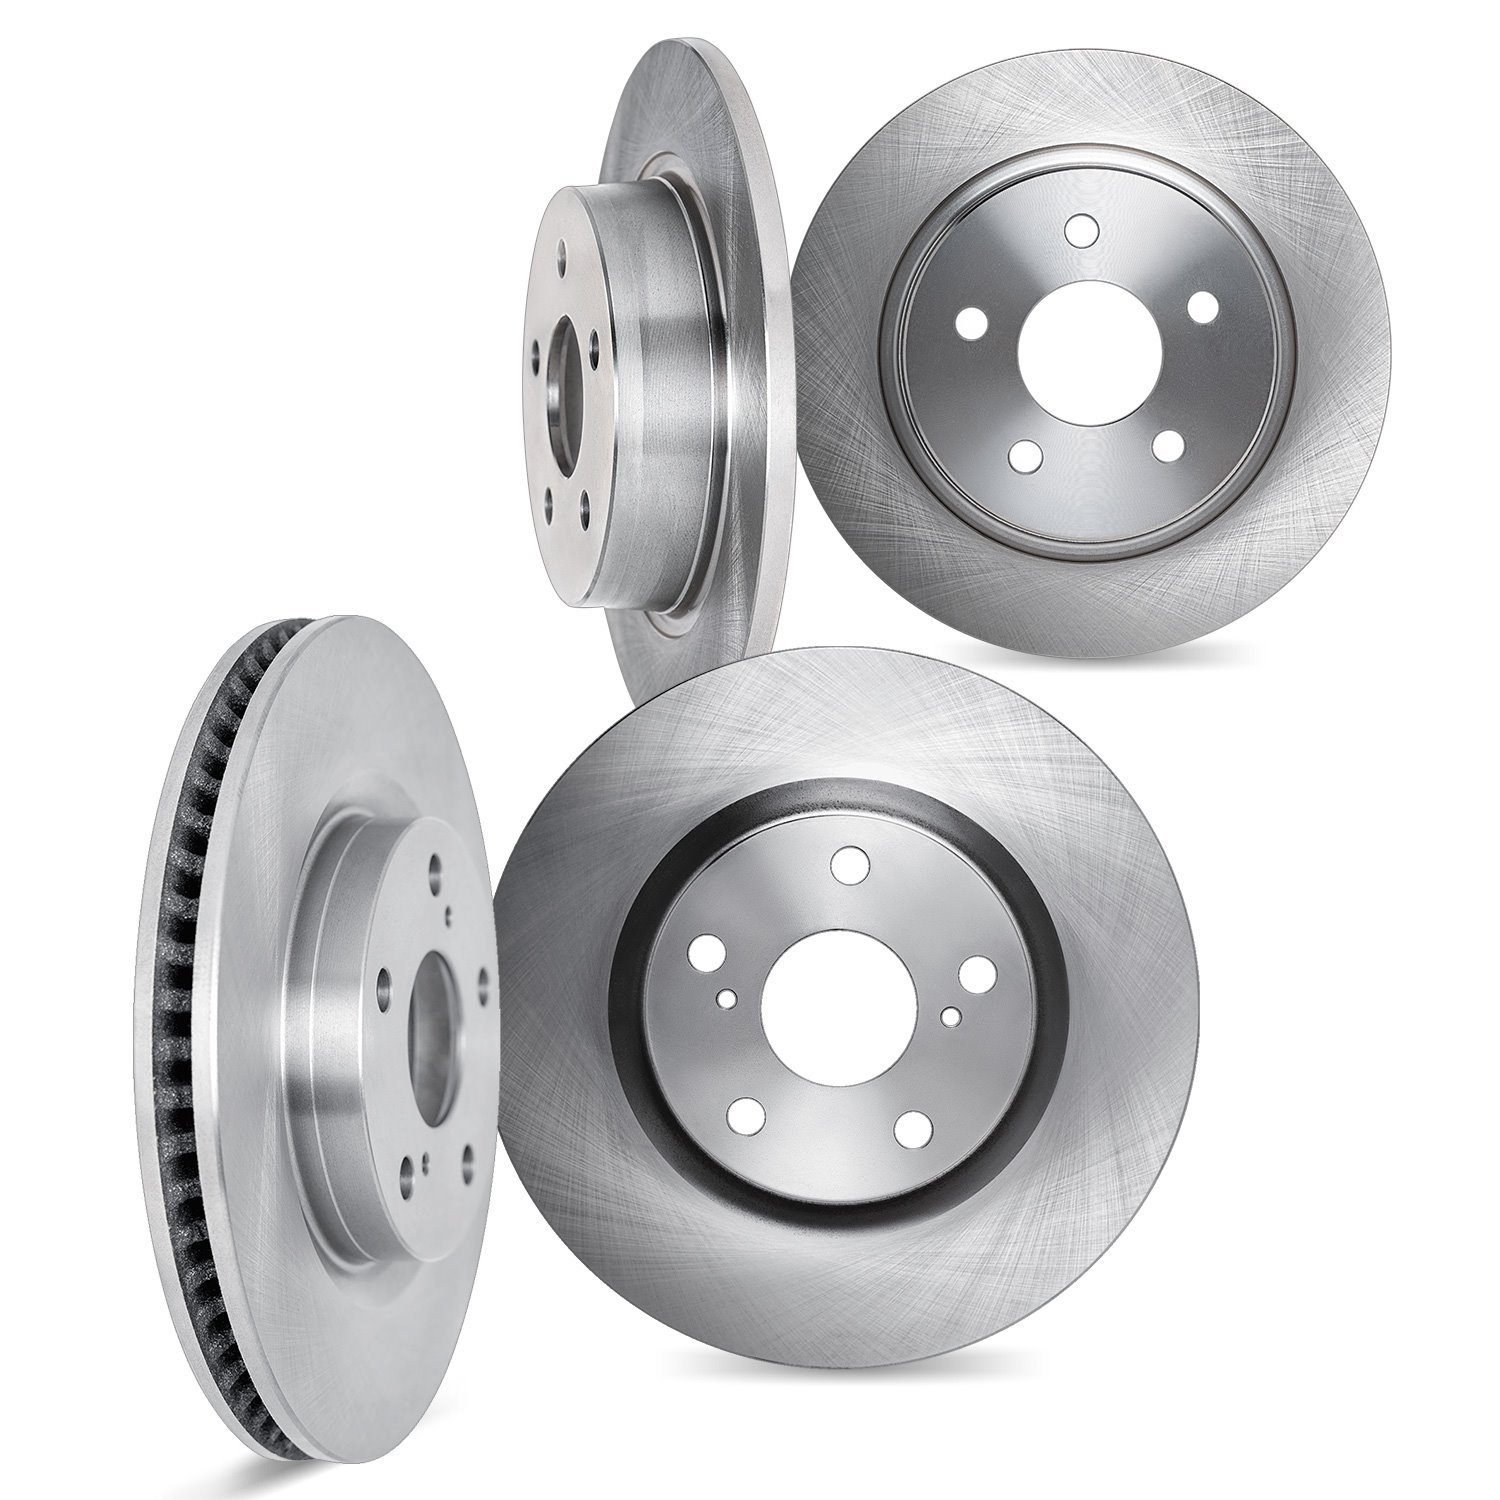 6004-39026 Brake Rotors, Fits Select Mopar, Position: Front and Rear